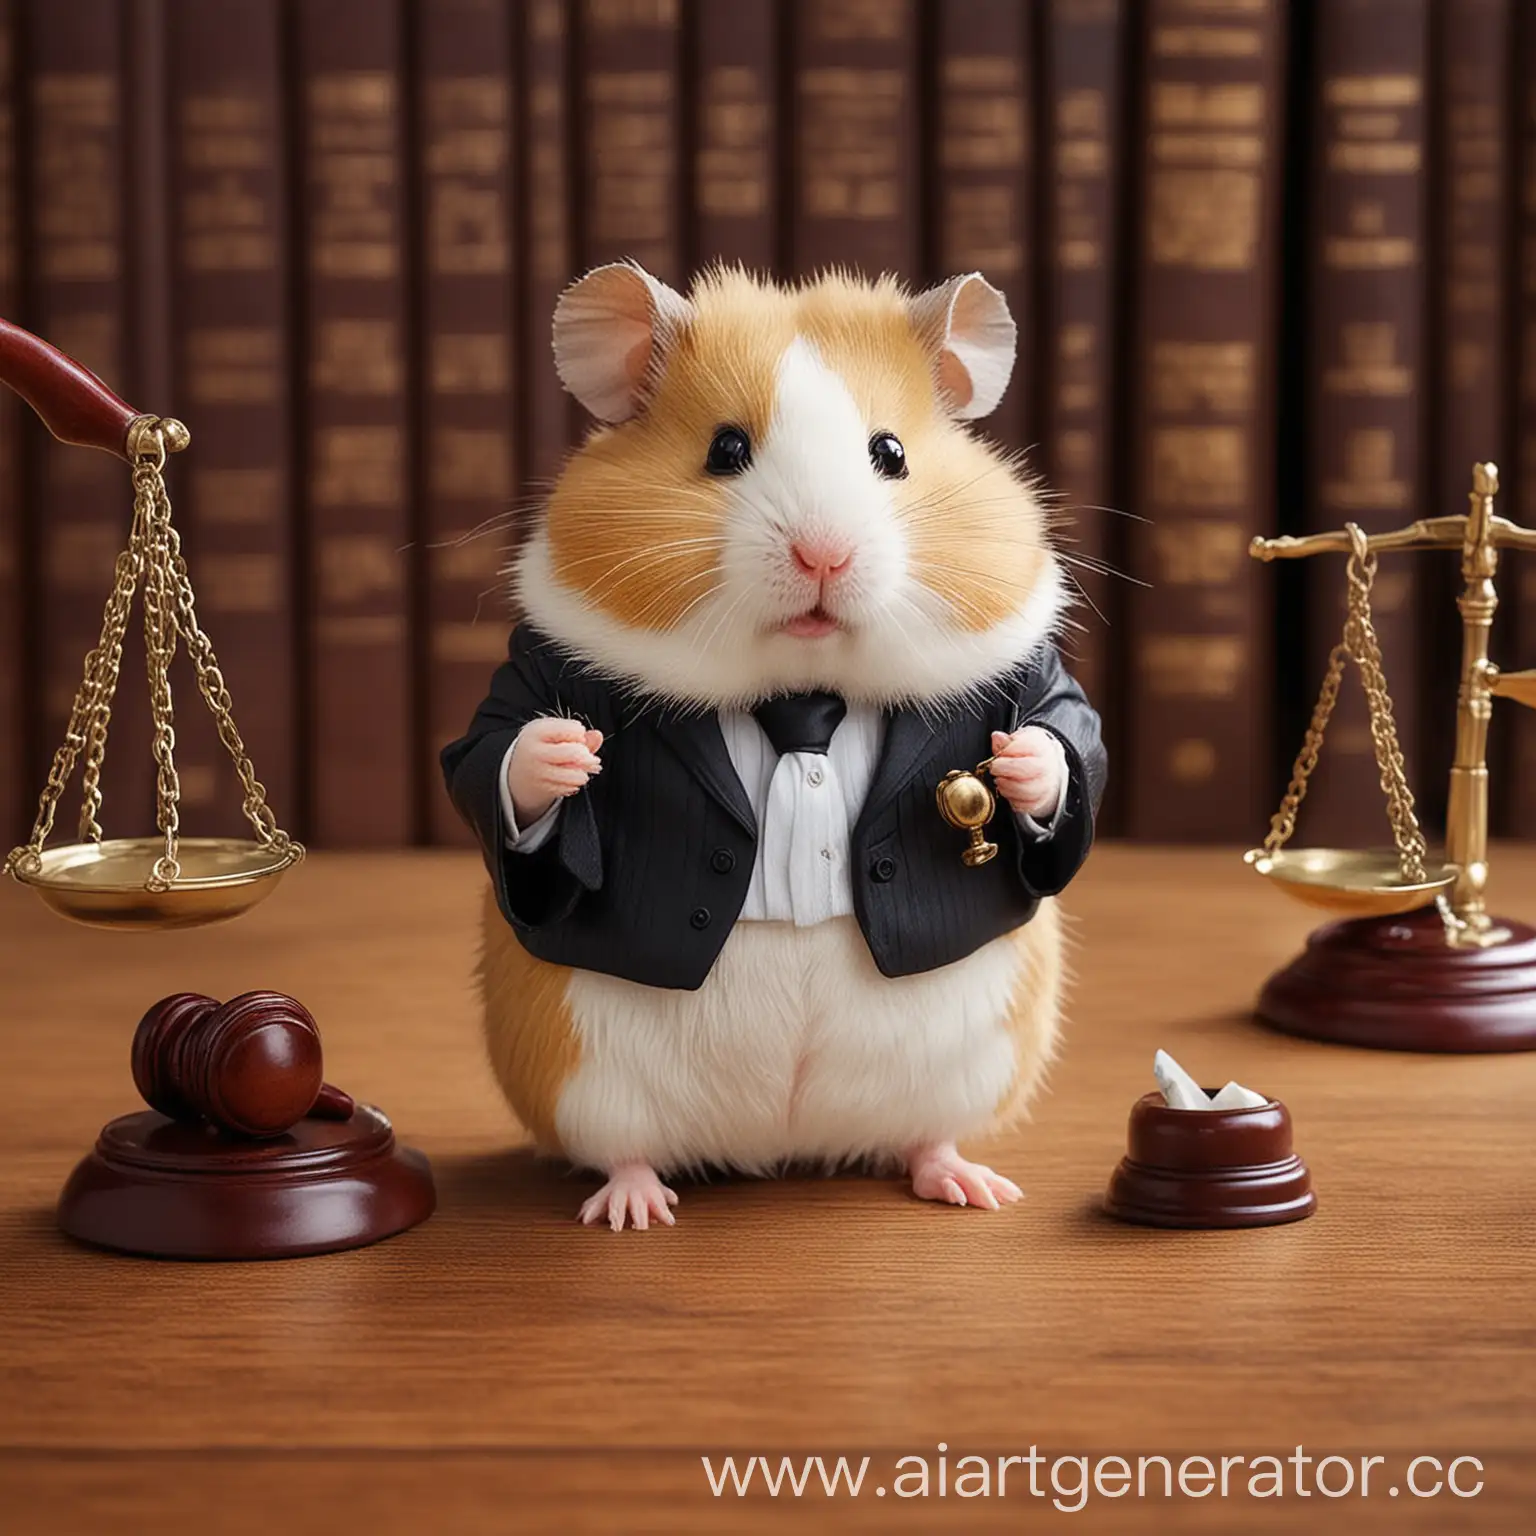 Hamster-Lawyer-in-Courtroom-Defending-a-Client